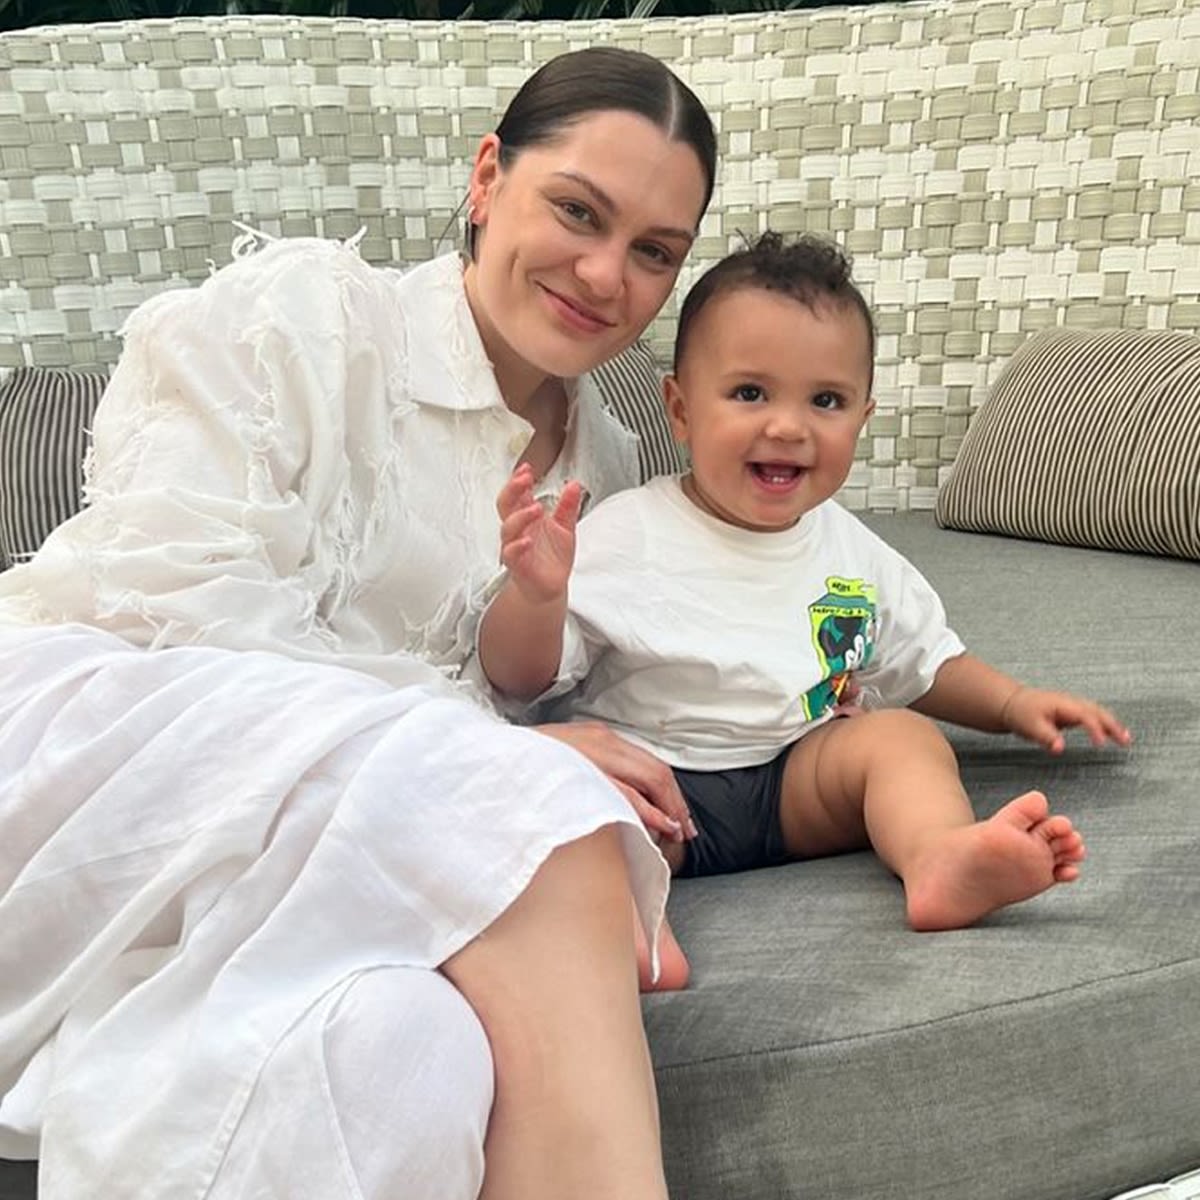 Jessie J Discusses Finding Her "New Self" One Year After Welcoming Son